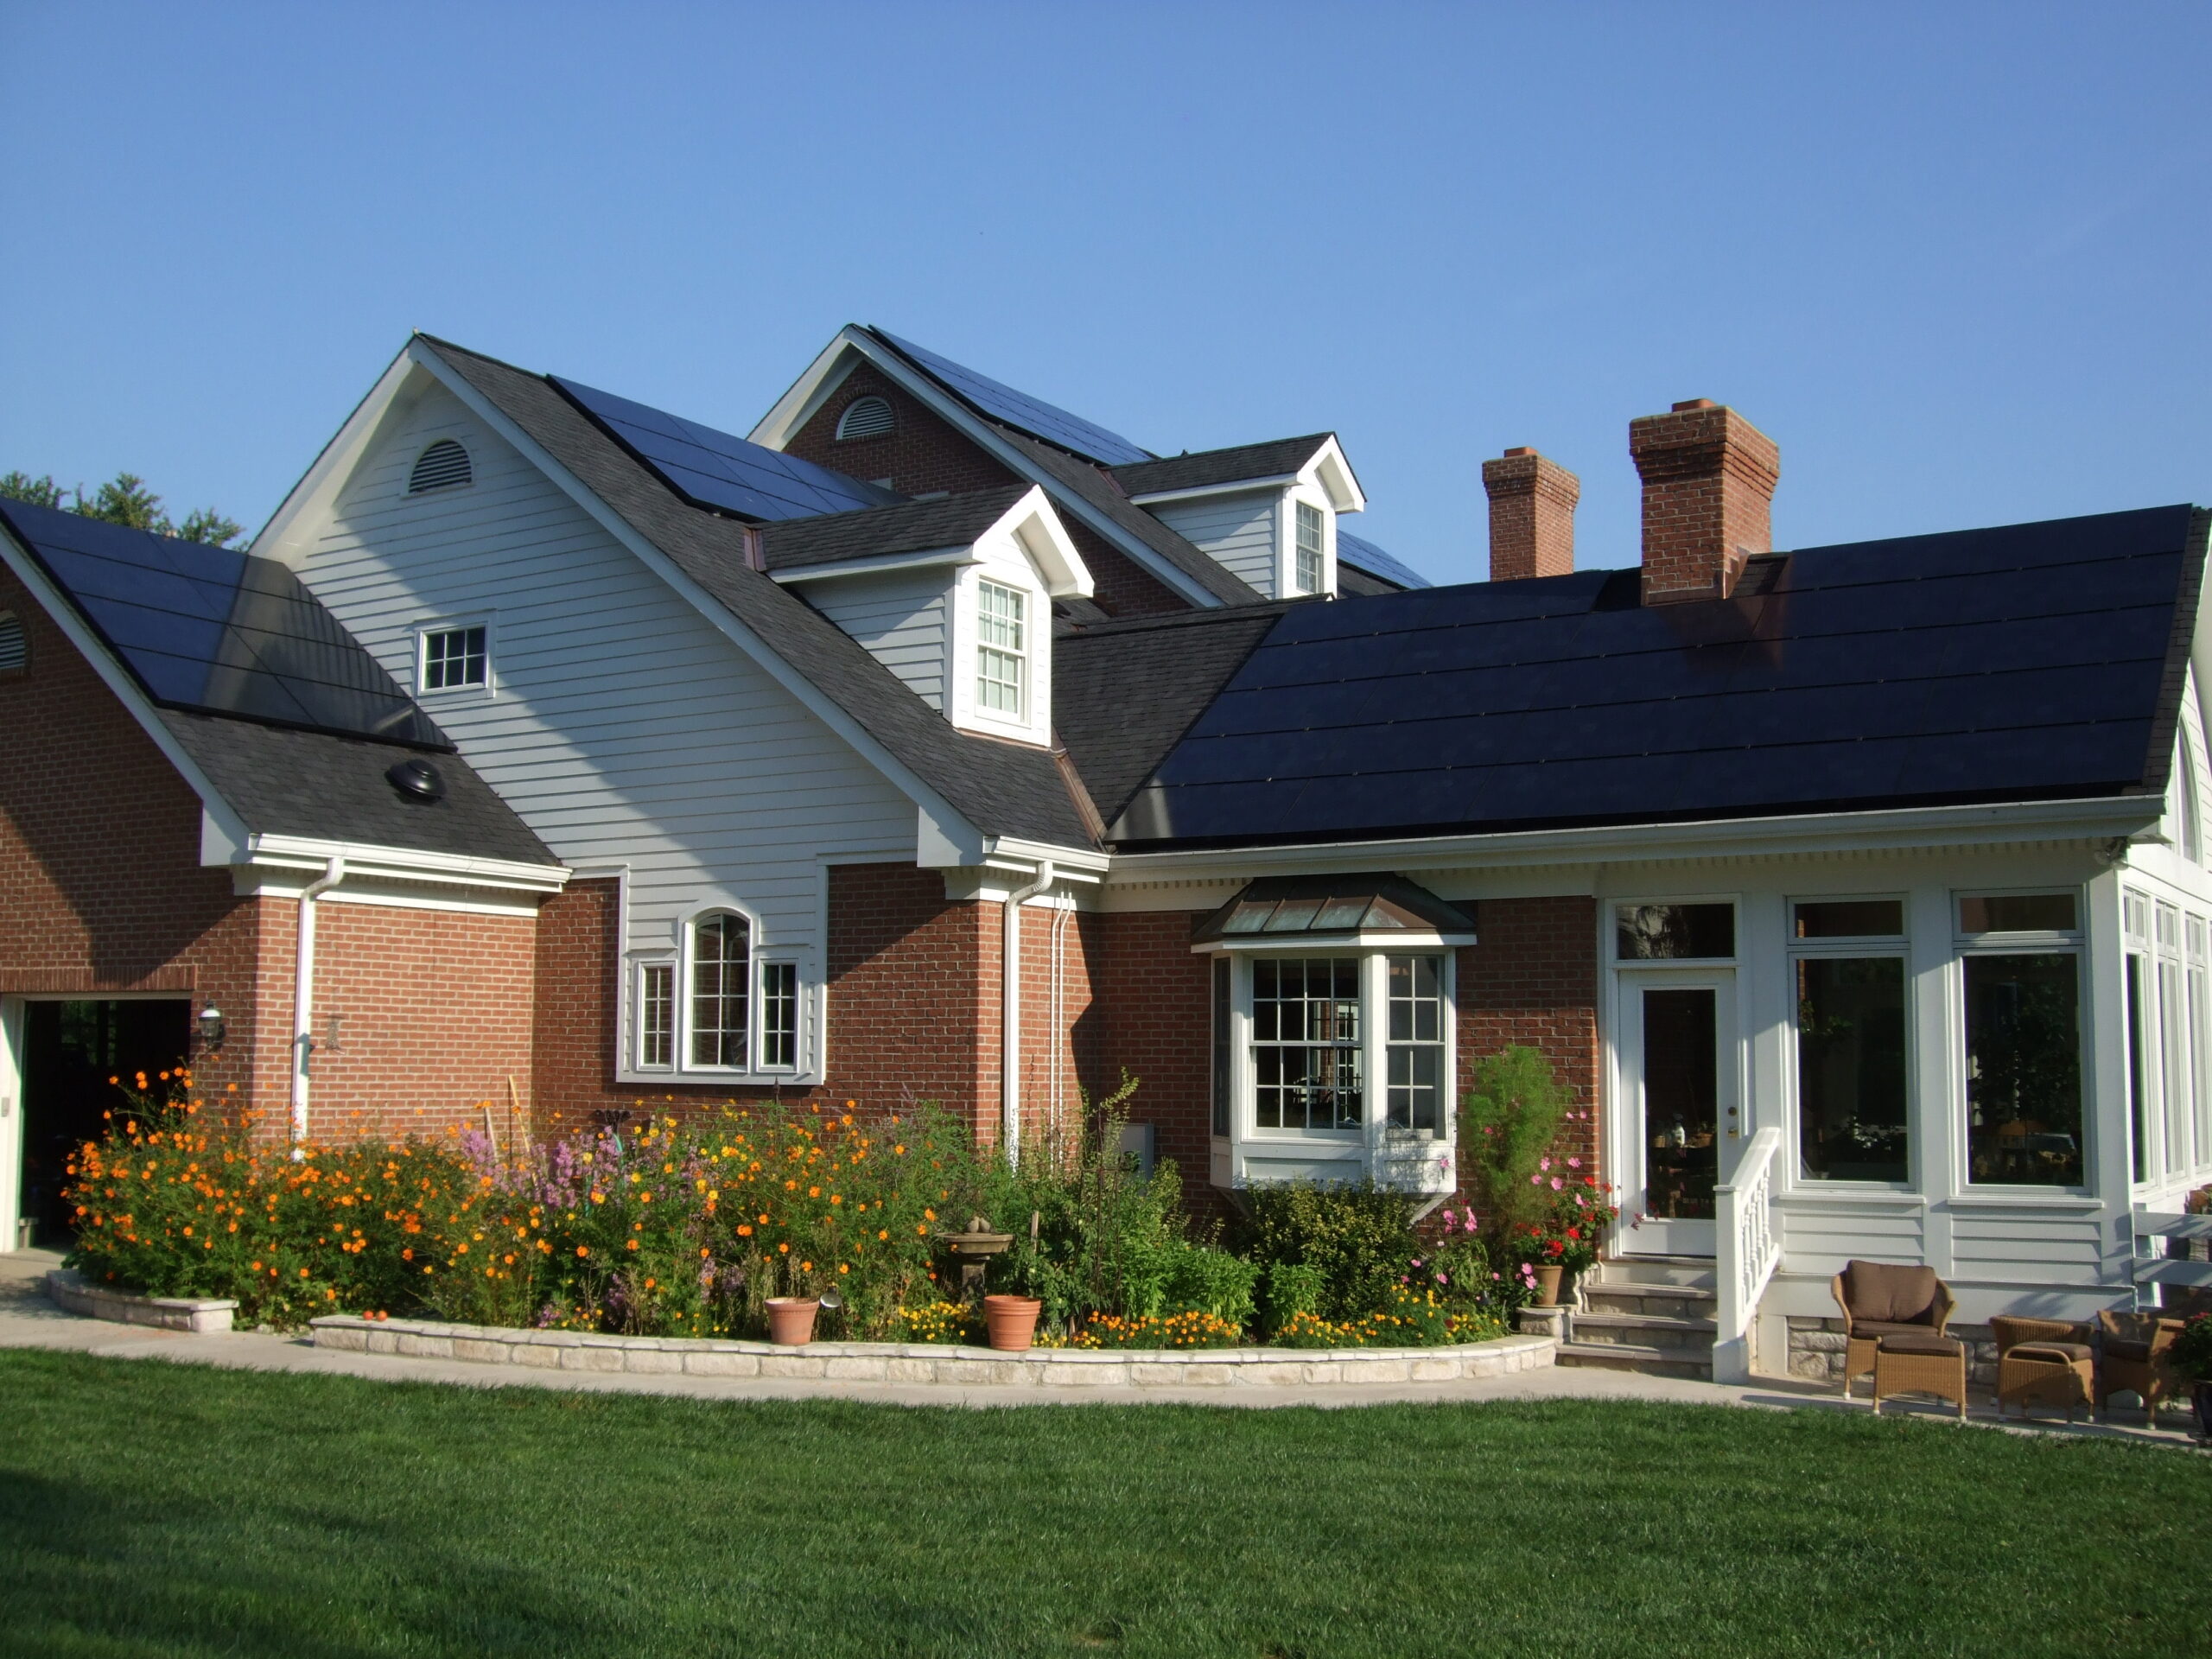 Ohio SB 61 Signed Into Law: Limits HOA Restrictions On Solar Installations